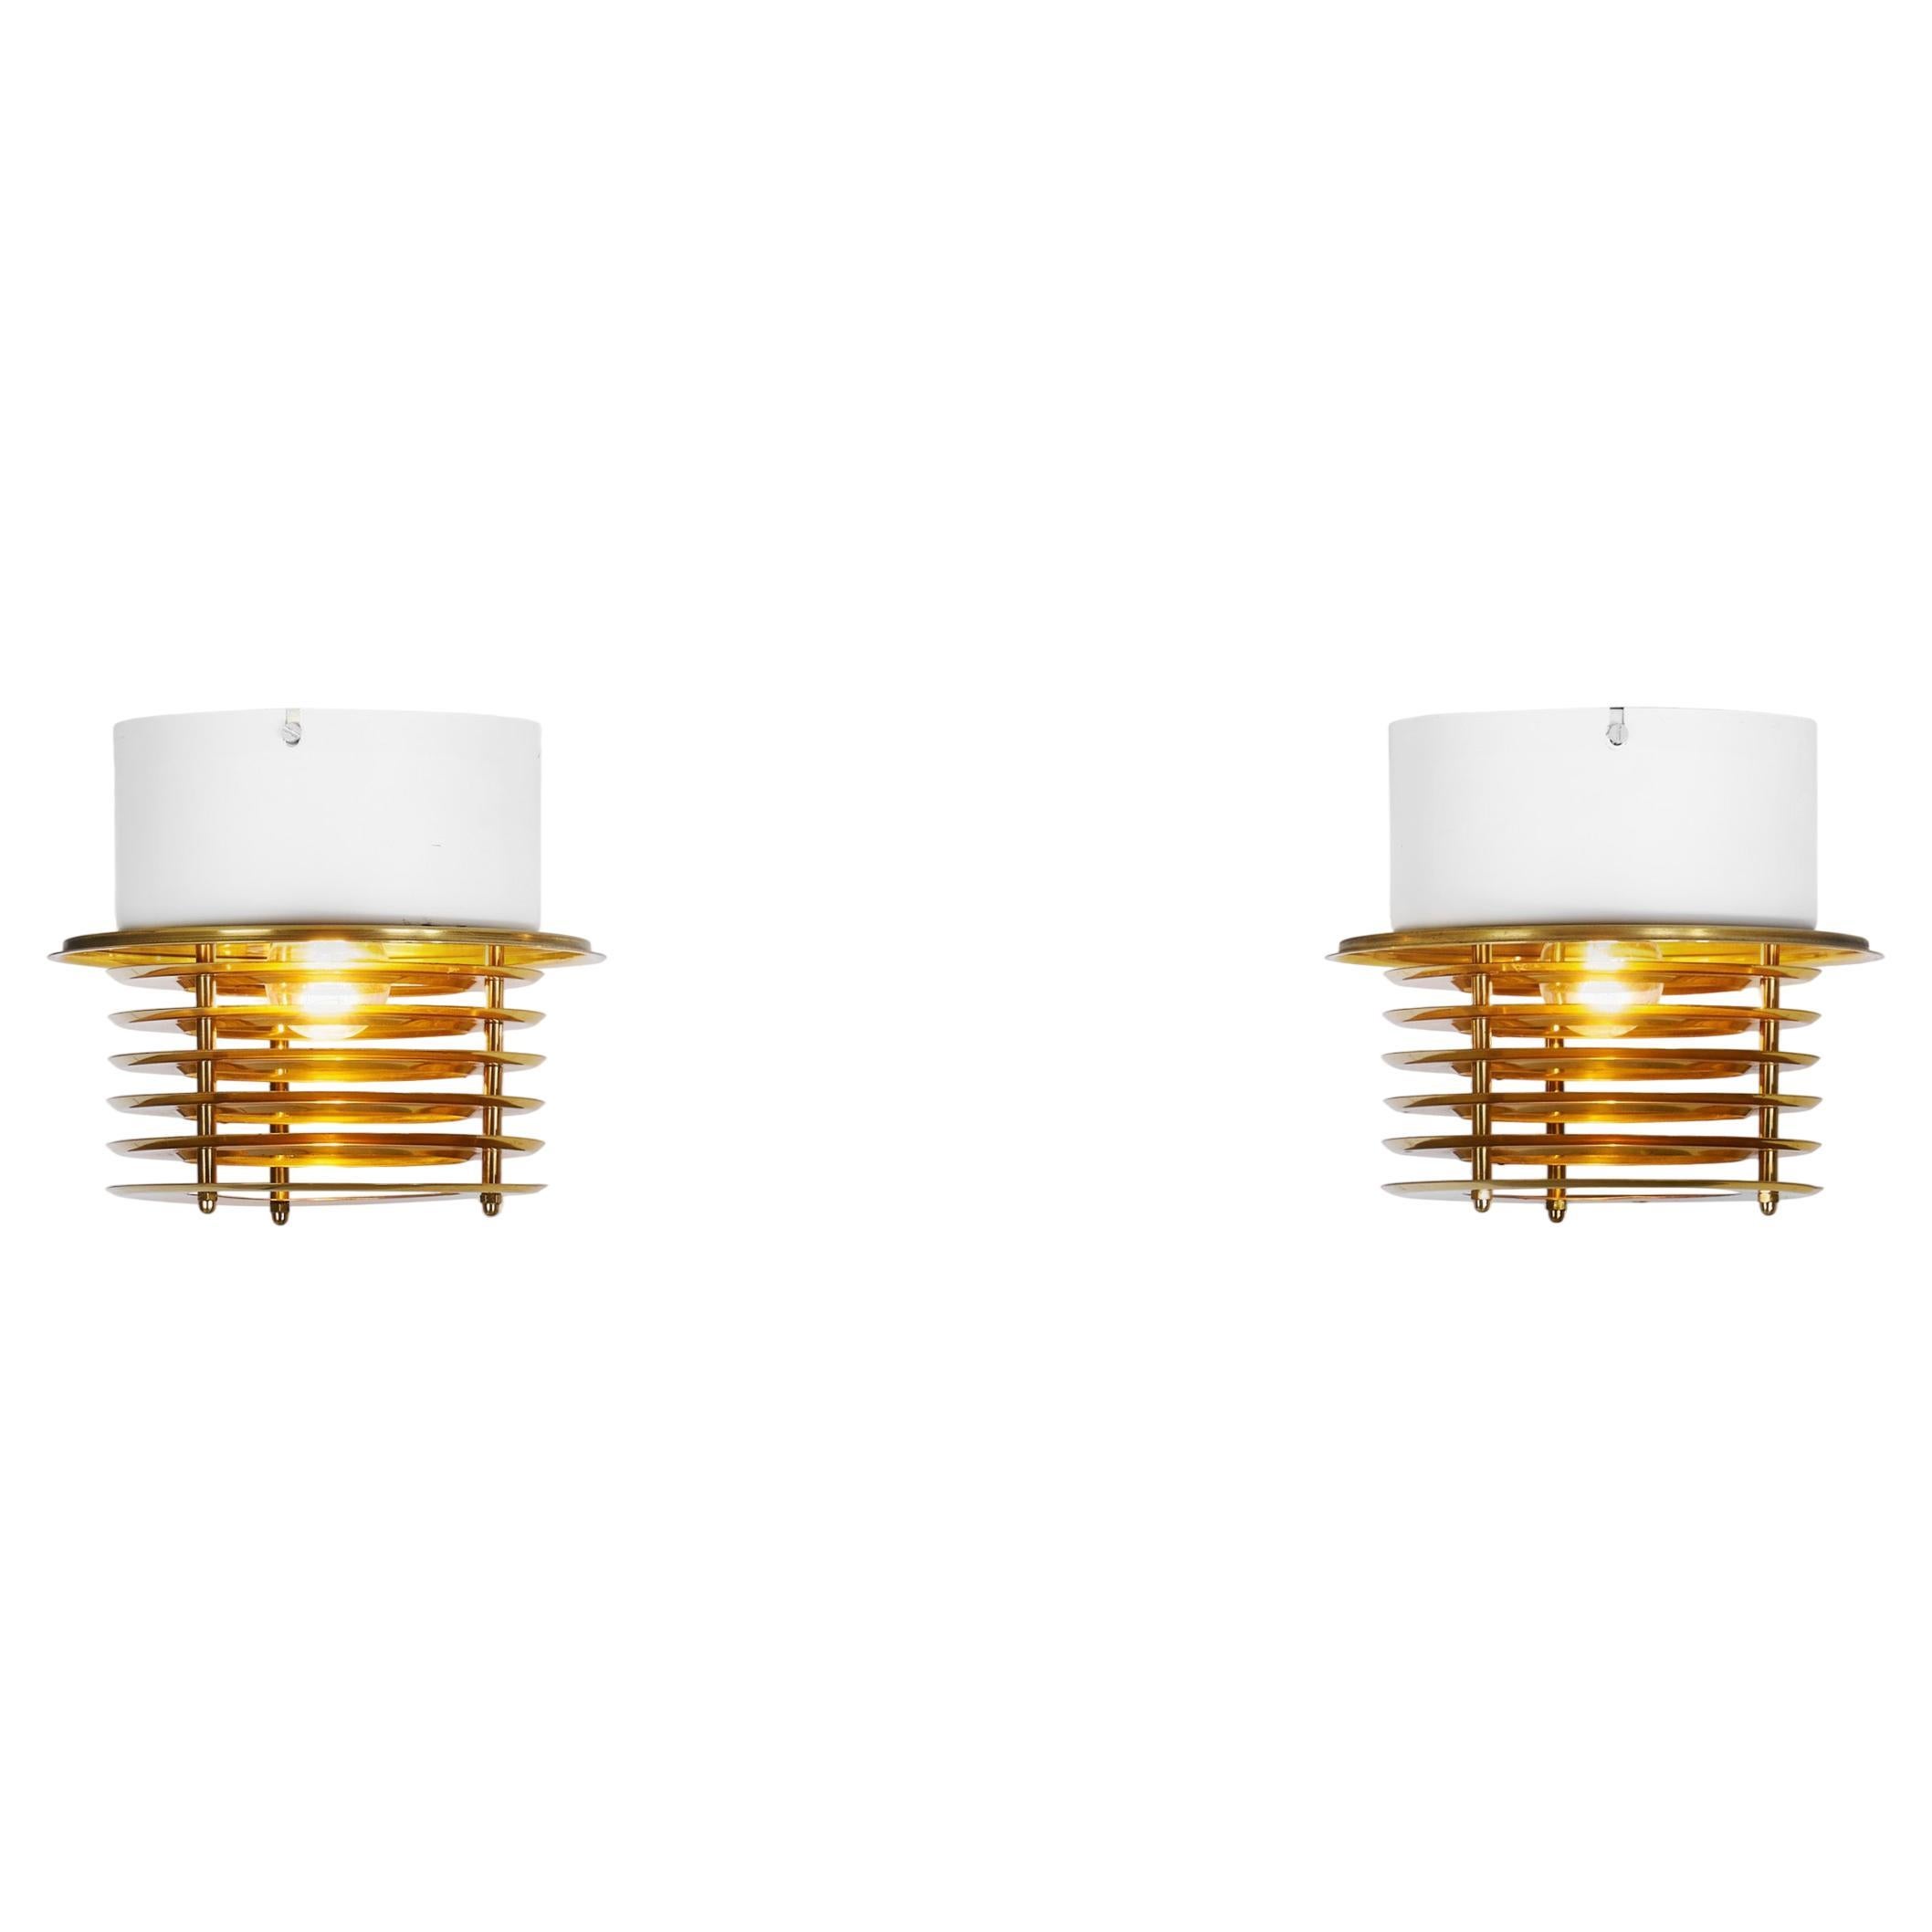 Brass and Metal Ceiling Lamps by Taiba-Falkenberg Belysnin, Sweden 1960s